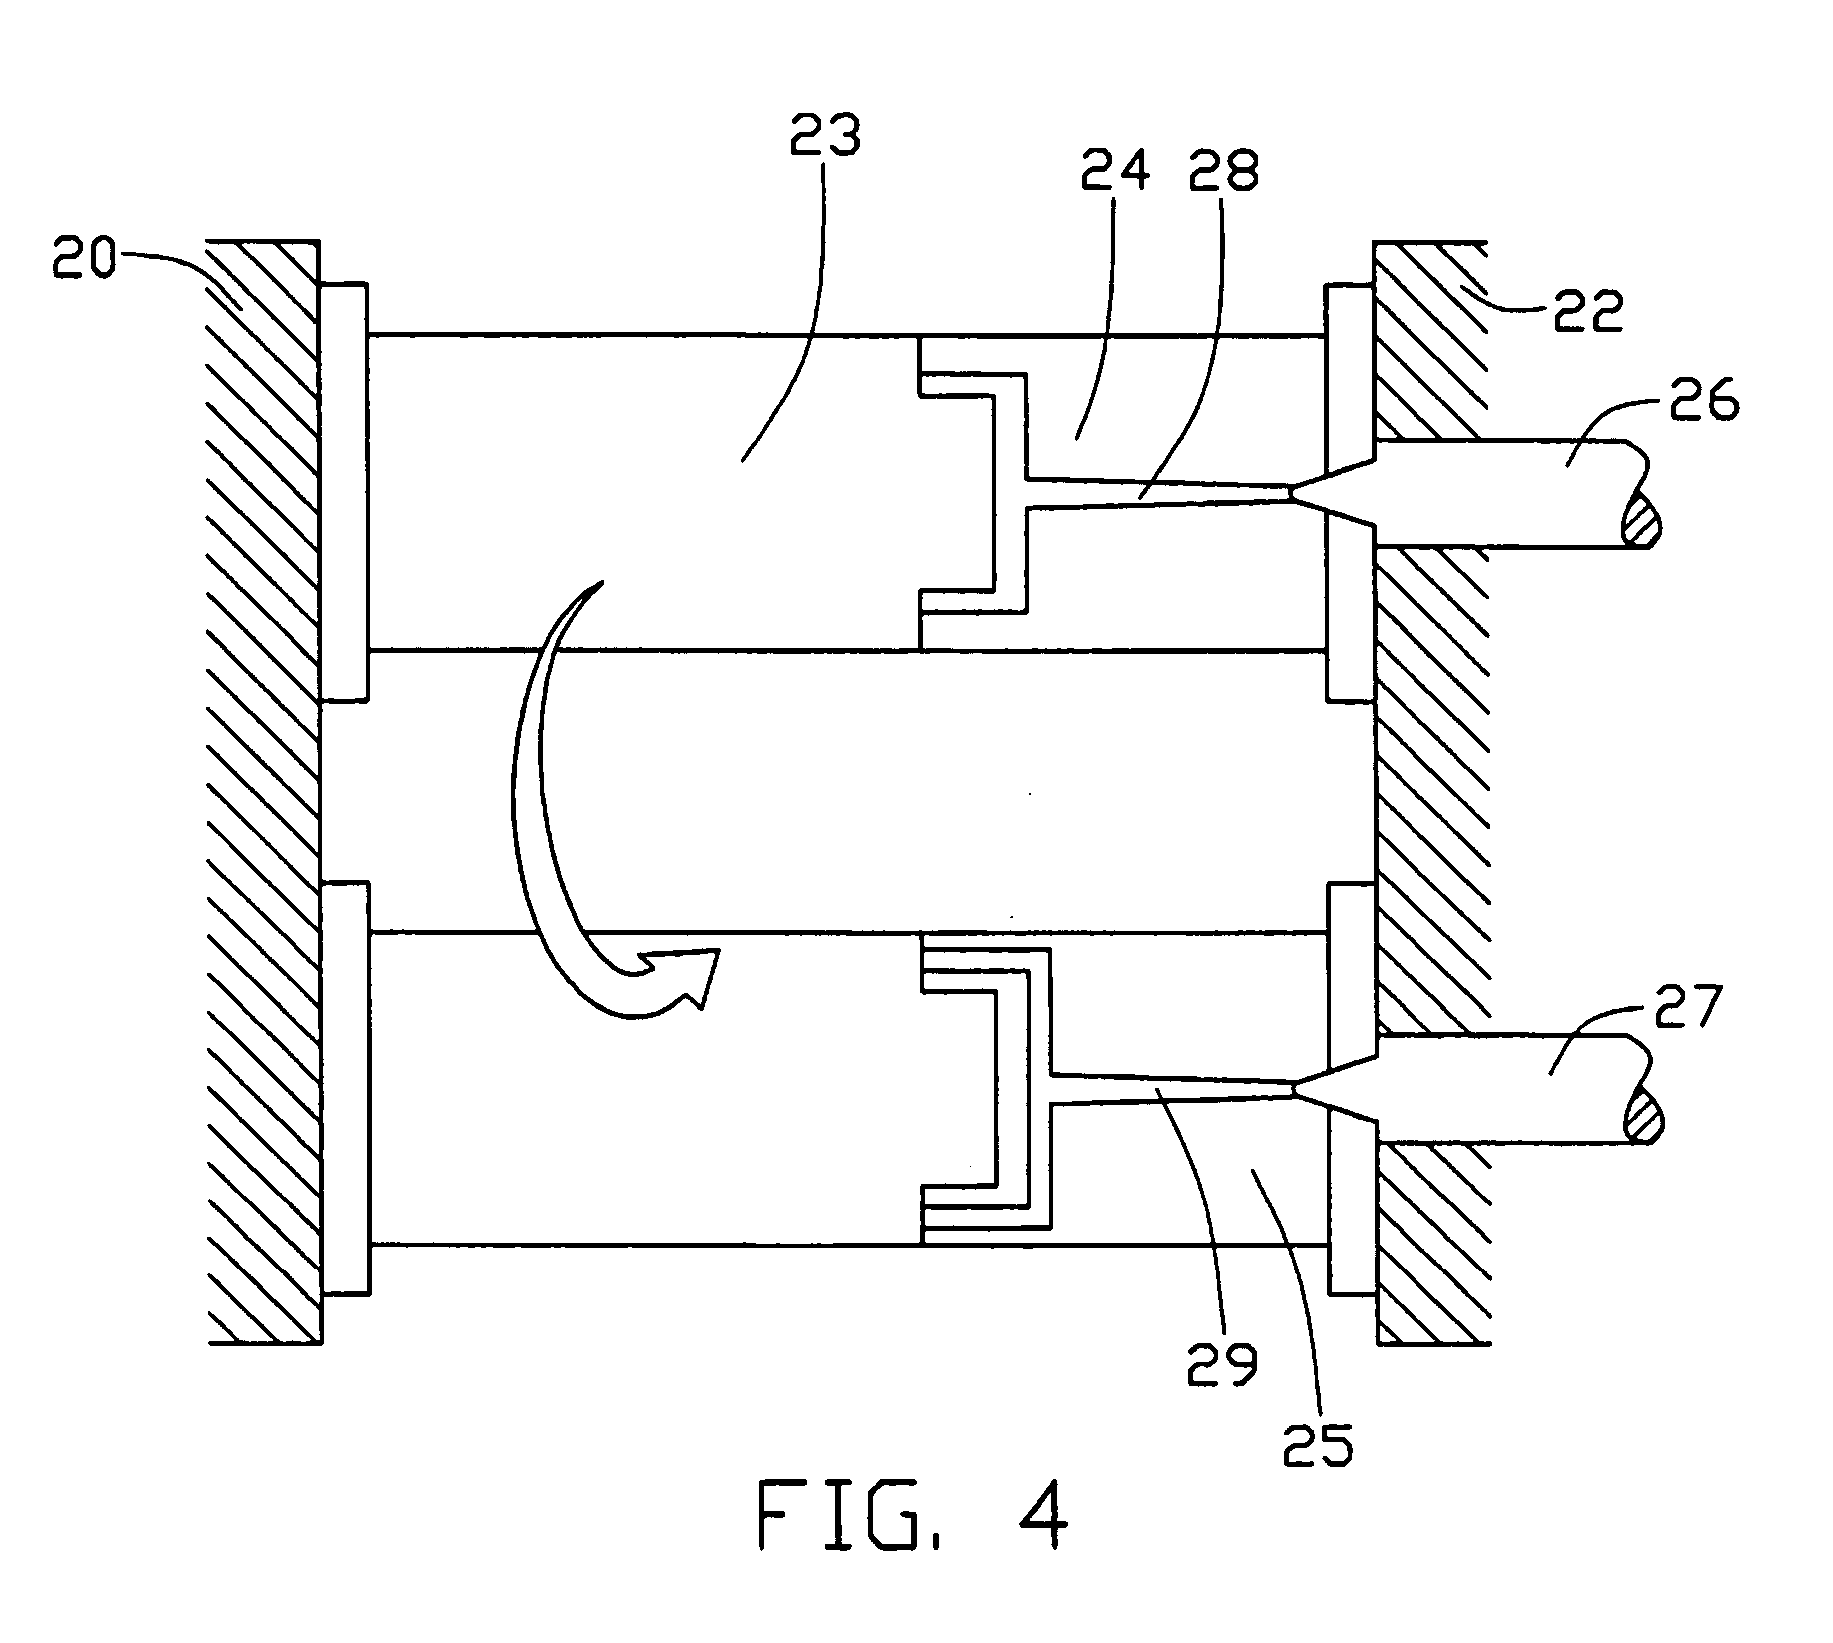 EMI shielding enclosure for portable electronic device and method for making same